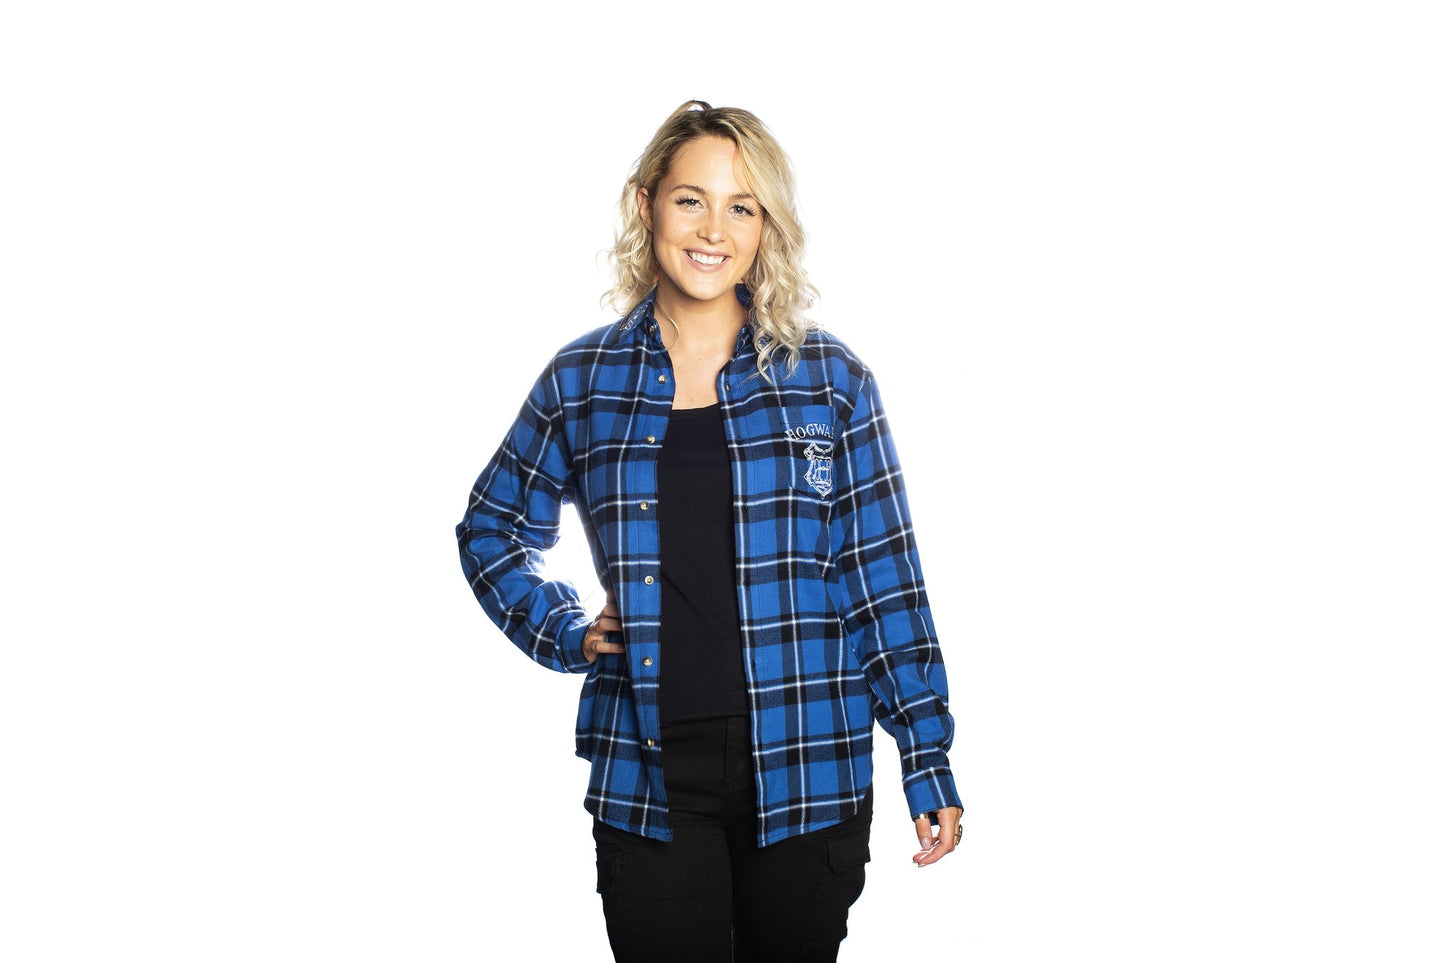 Harry Potter Ravenclaw Flannel—Cakeworthy